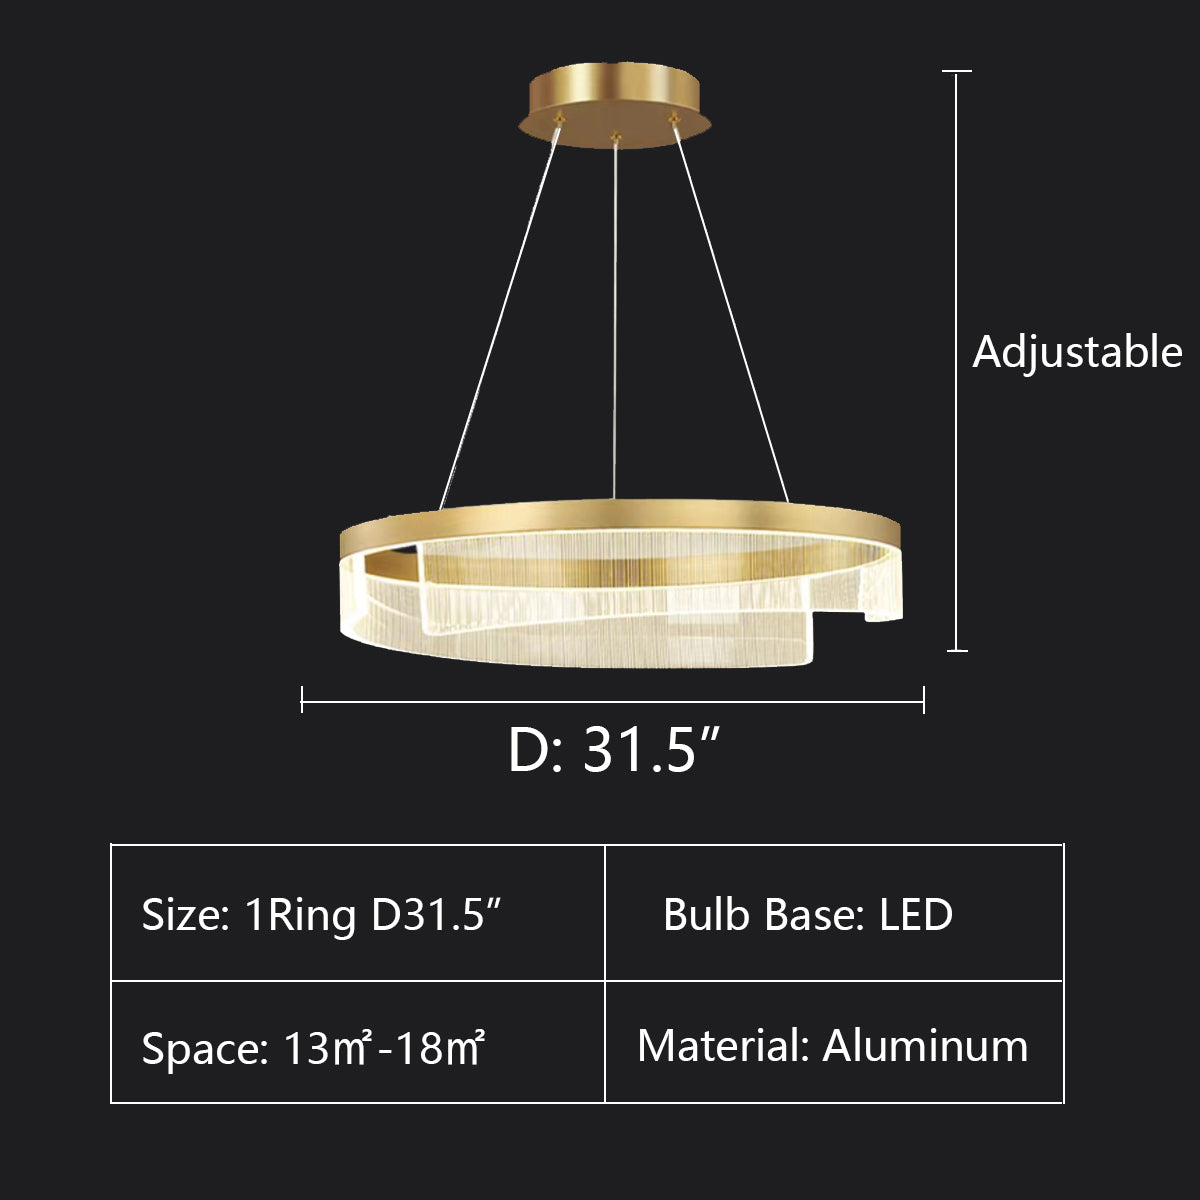 1Ring:D31.5" chandelier,chandeliers,aluminum,gold,adjustable,Acrylic lampshade，dining table,round,ring,circle,round table,big table,long table,light fixture,living room,bar,cafe,dining room,foyer,entryway